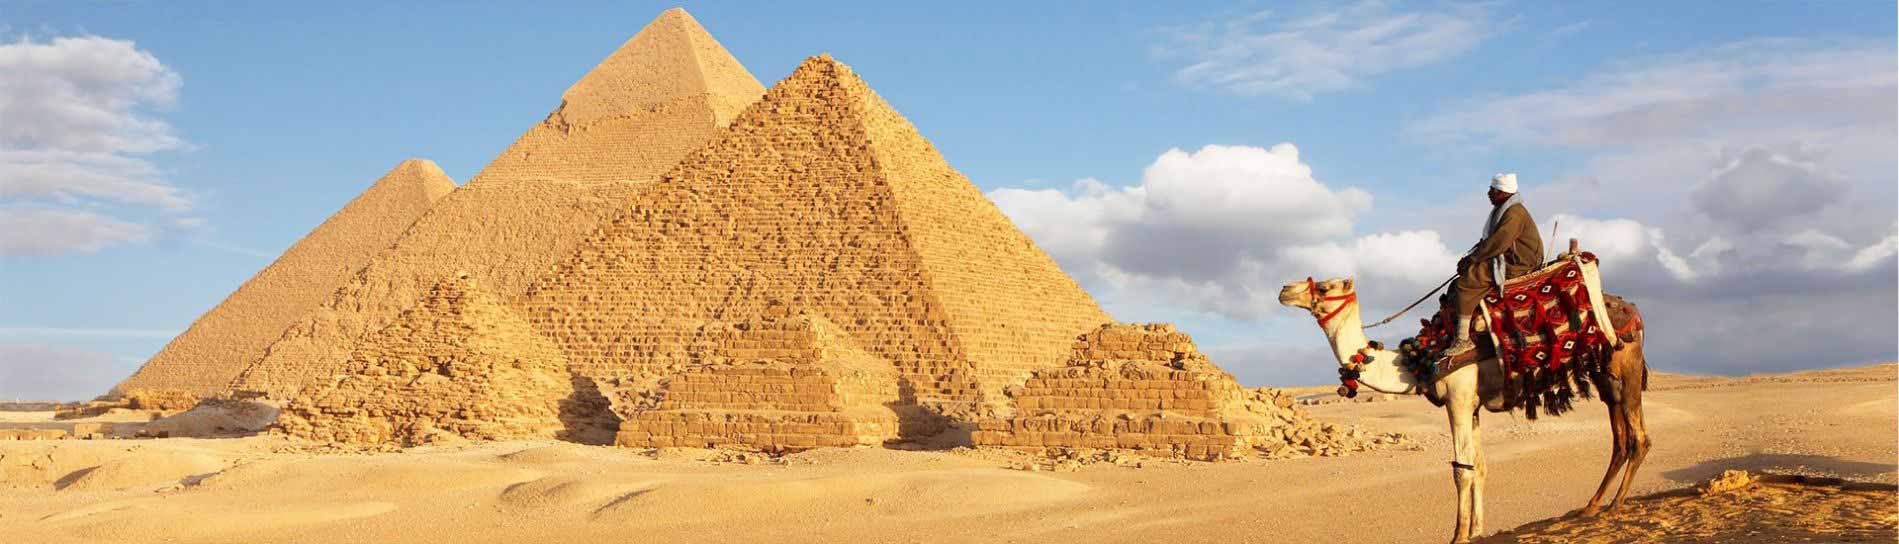 Cairo Tour from Eilat - 1 day